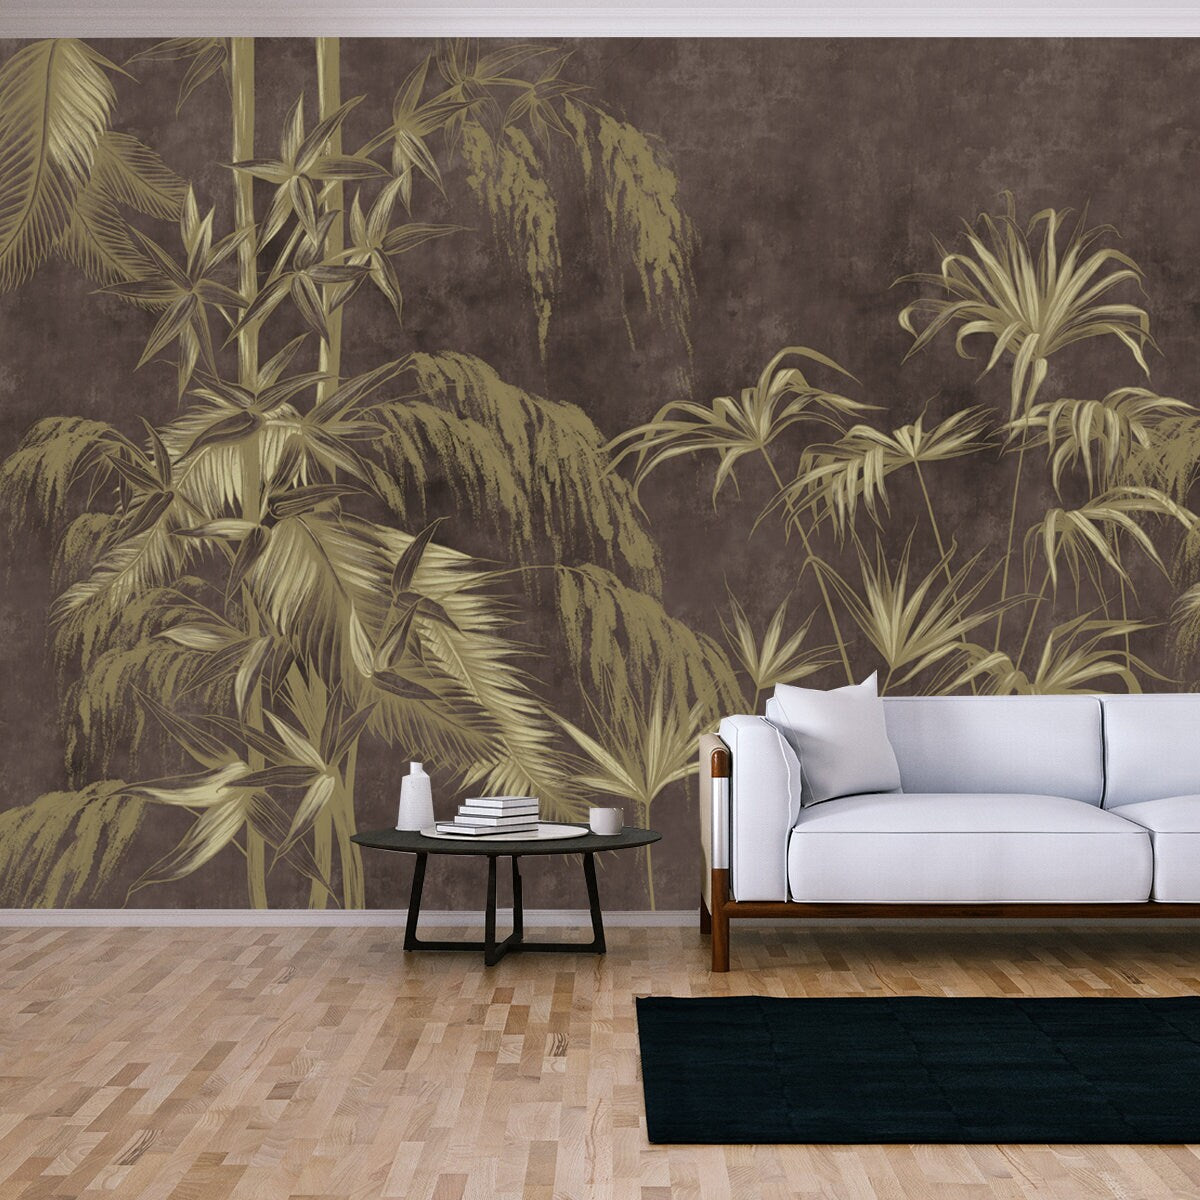 Graphic Exotic Flowers on the Concrete Grunge Wall. Dark Background Wallpaper Living Room Mural